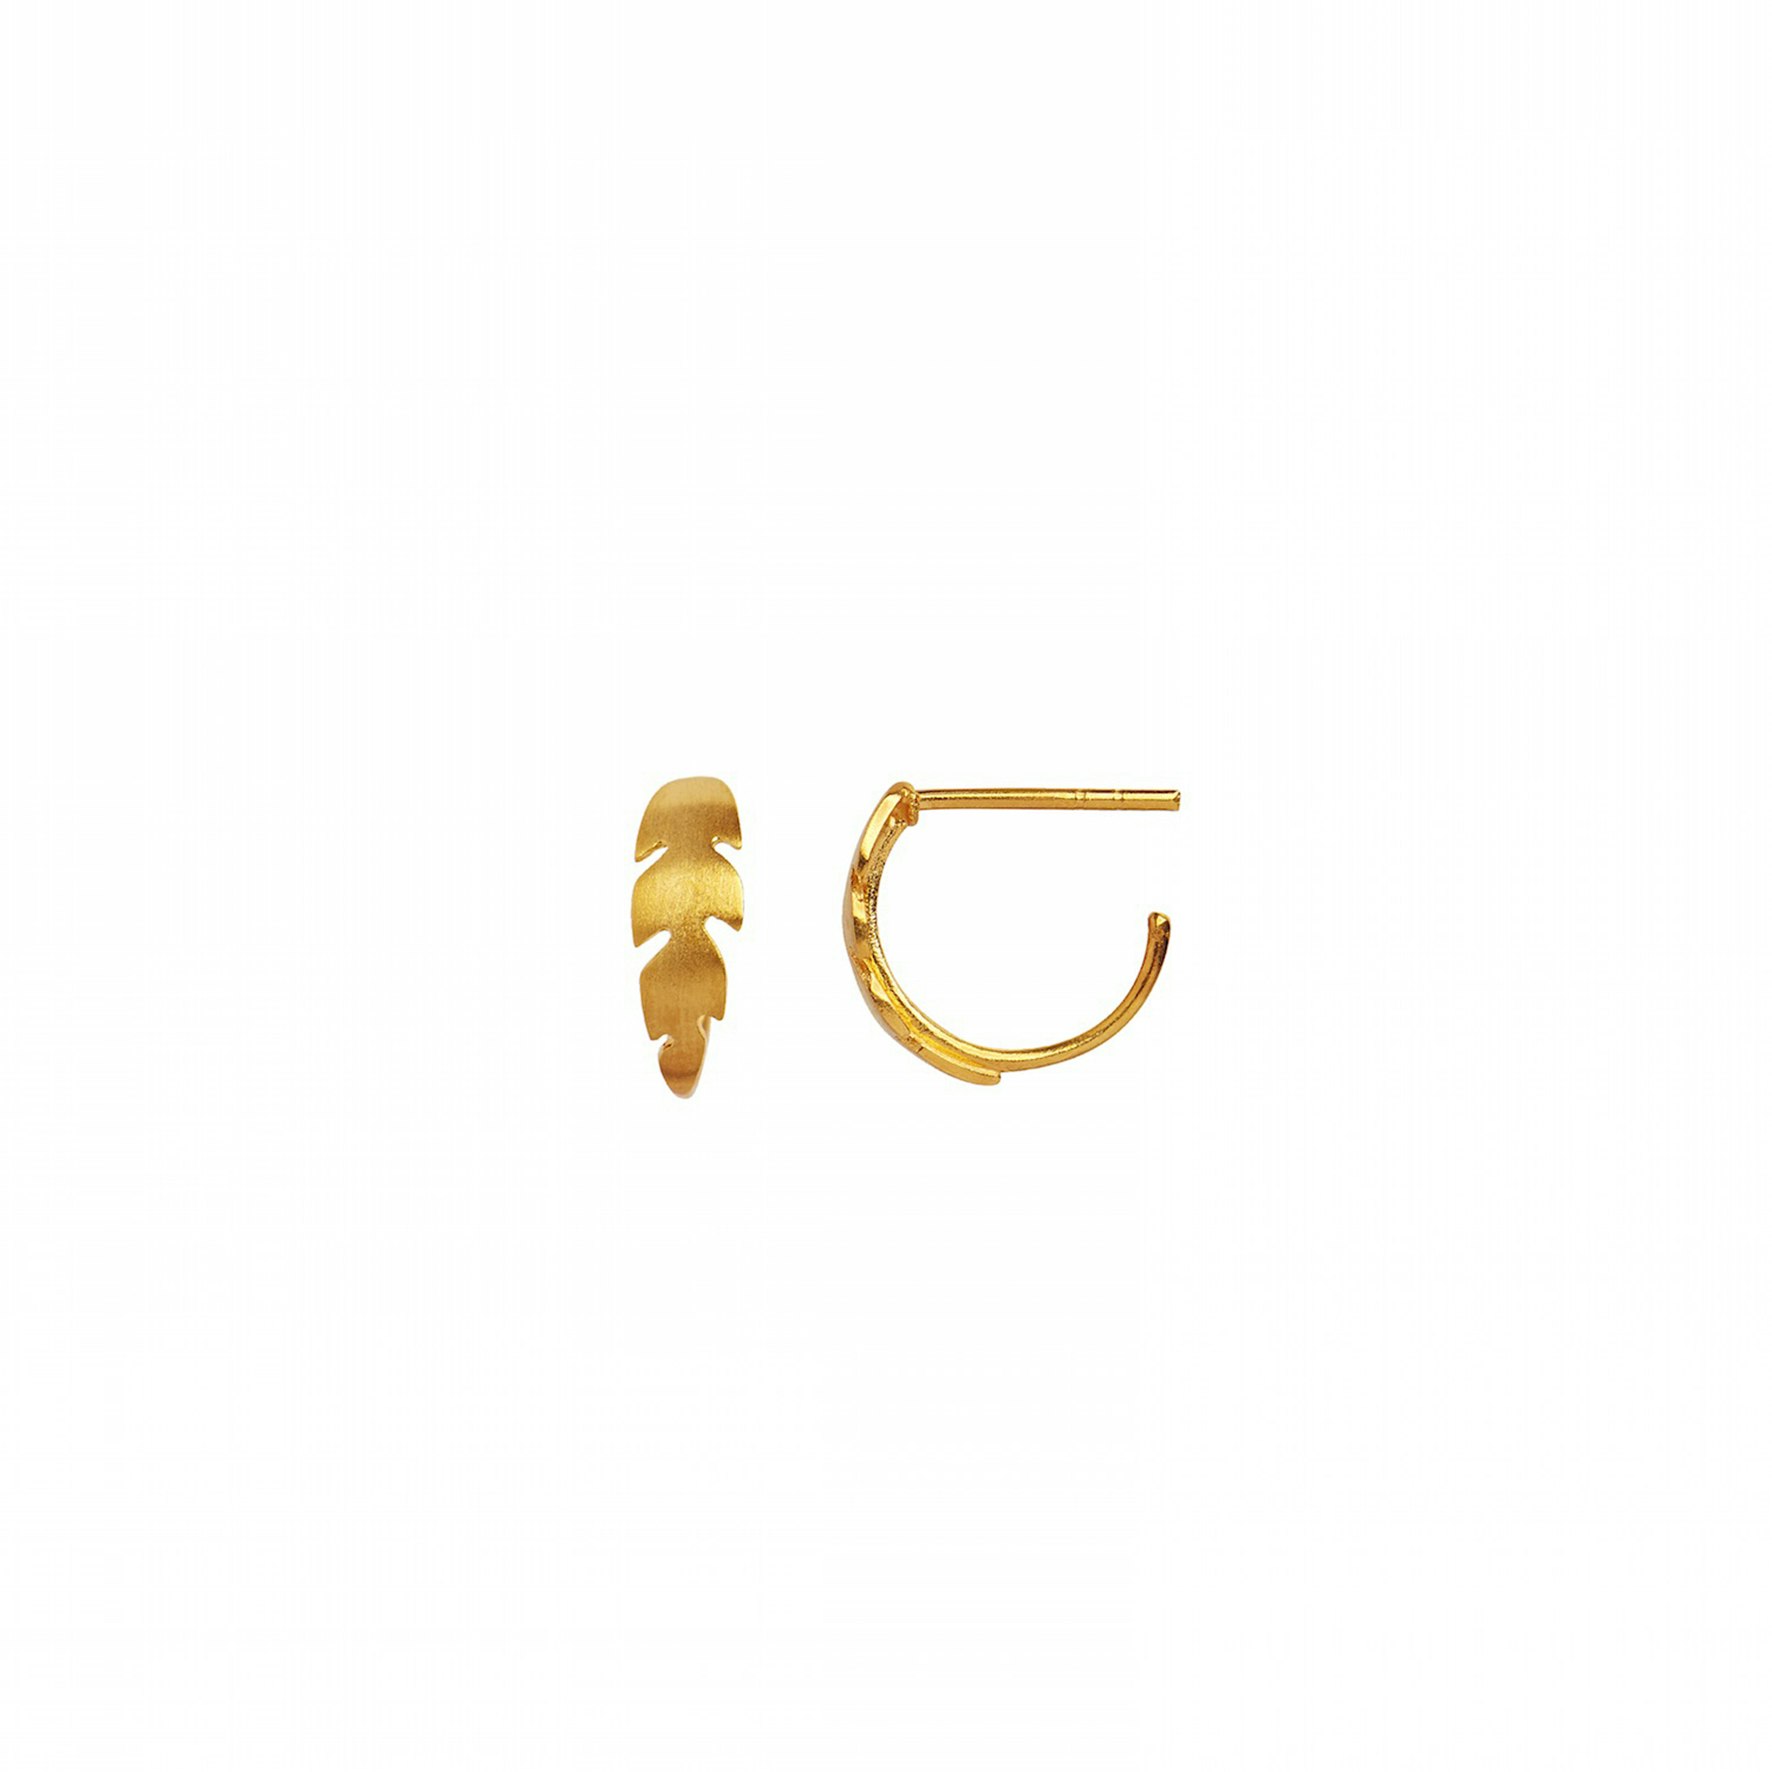 Petit Creol With Feather Earring from STINE A Jewelry in Goldplated Silver Sterling 925